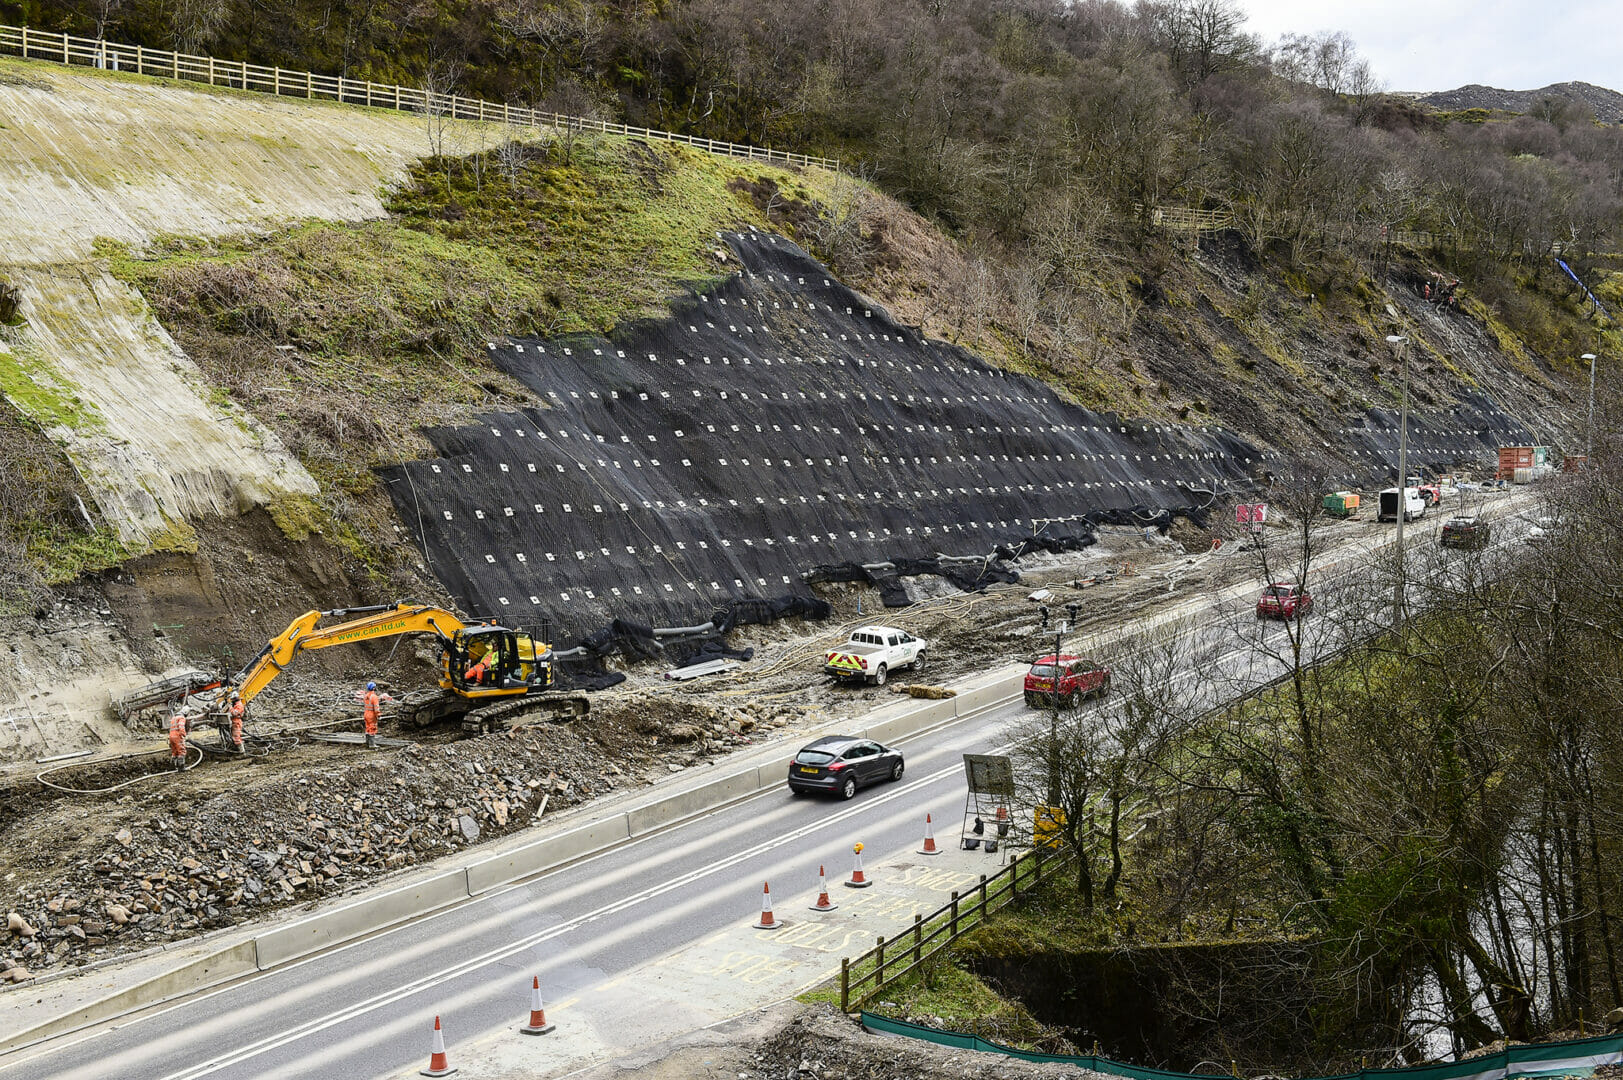 Heads of the Valleys Road Reinforcement – CAN Geotechnical Nailed It!